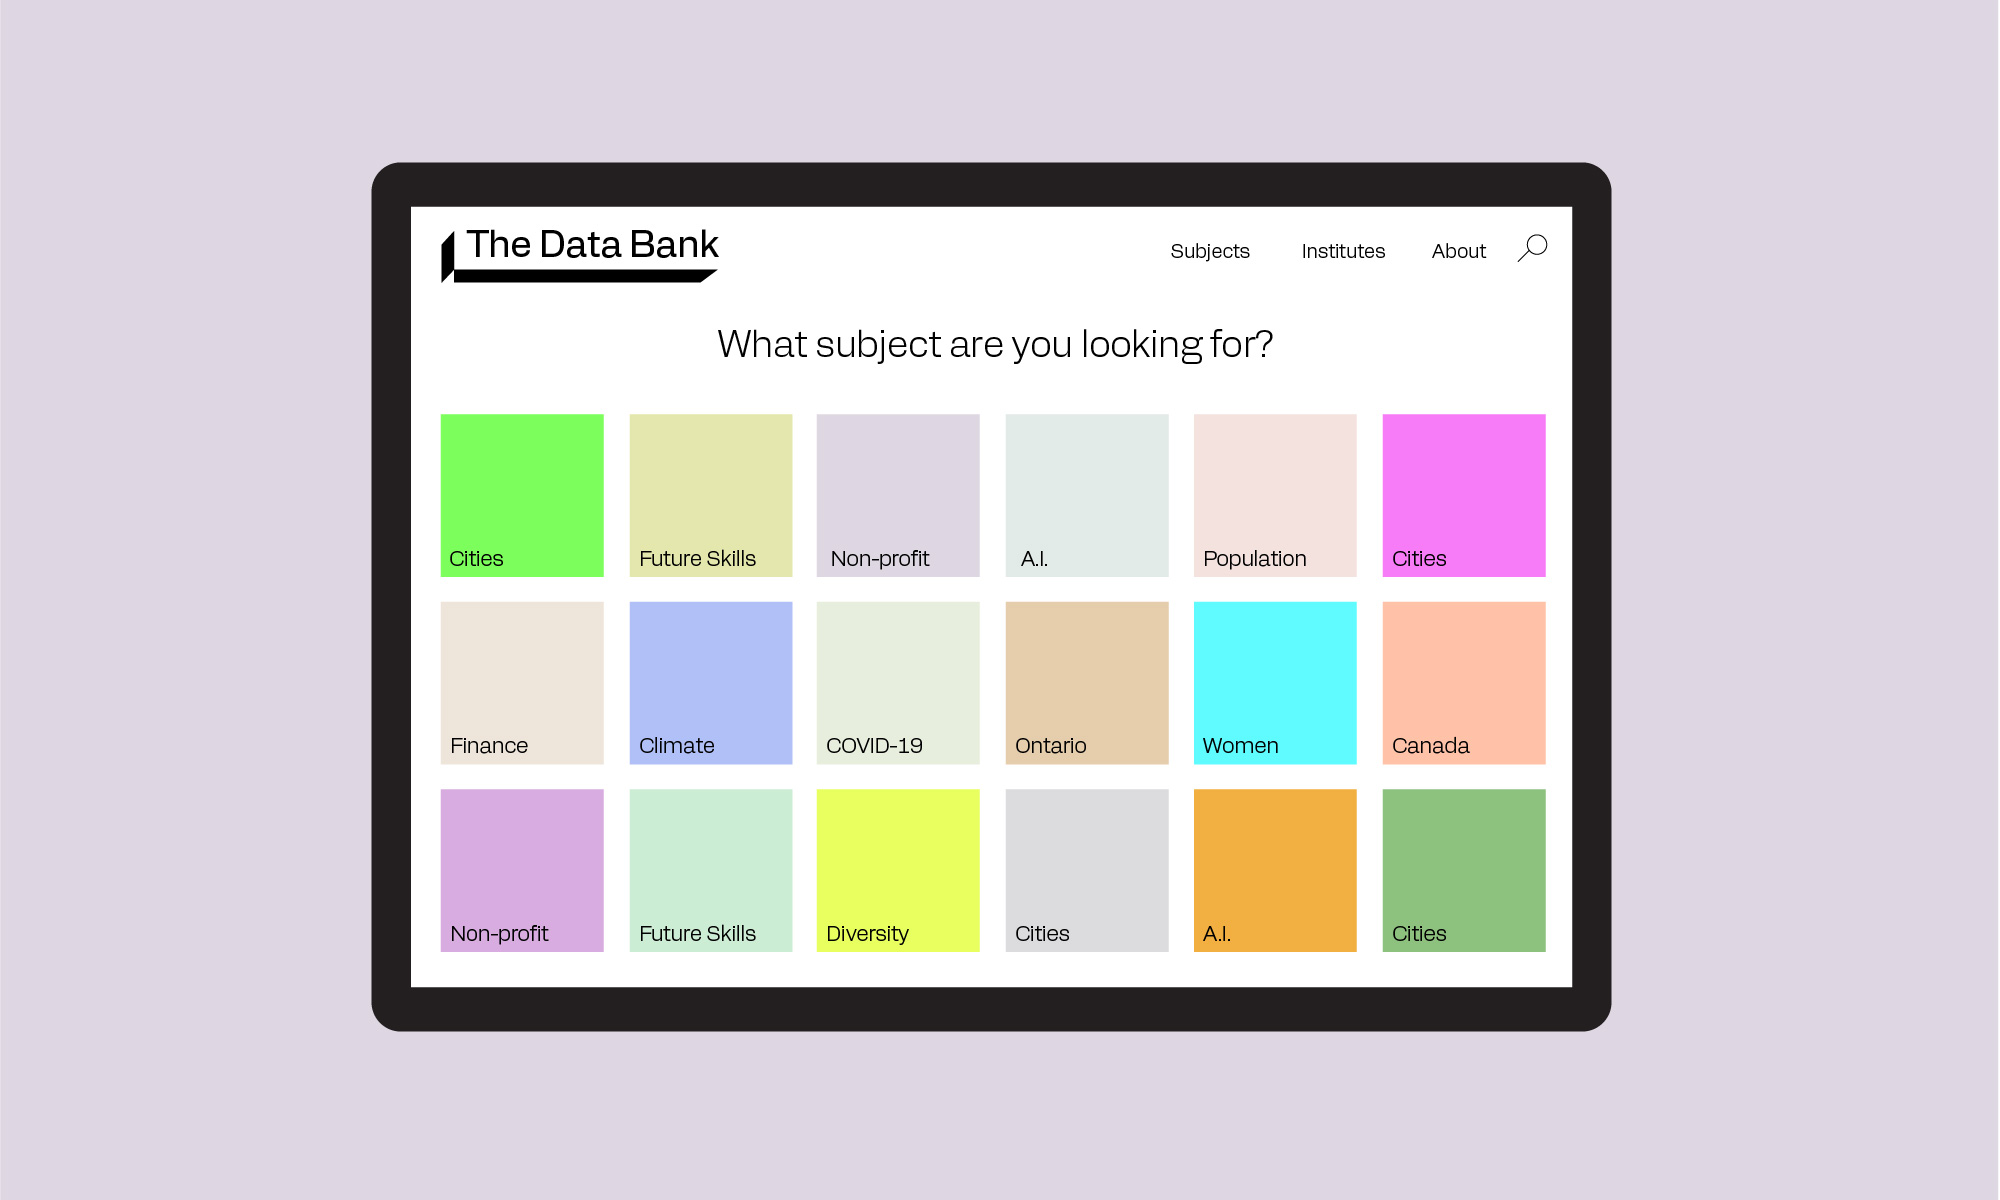 the data bank canadian research website design